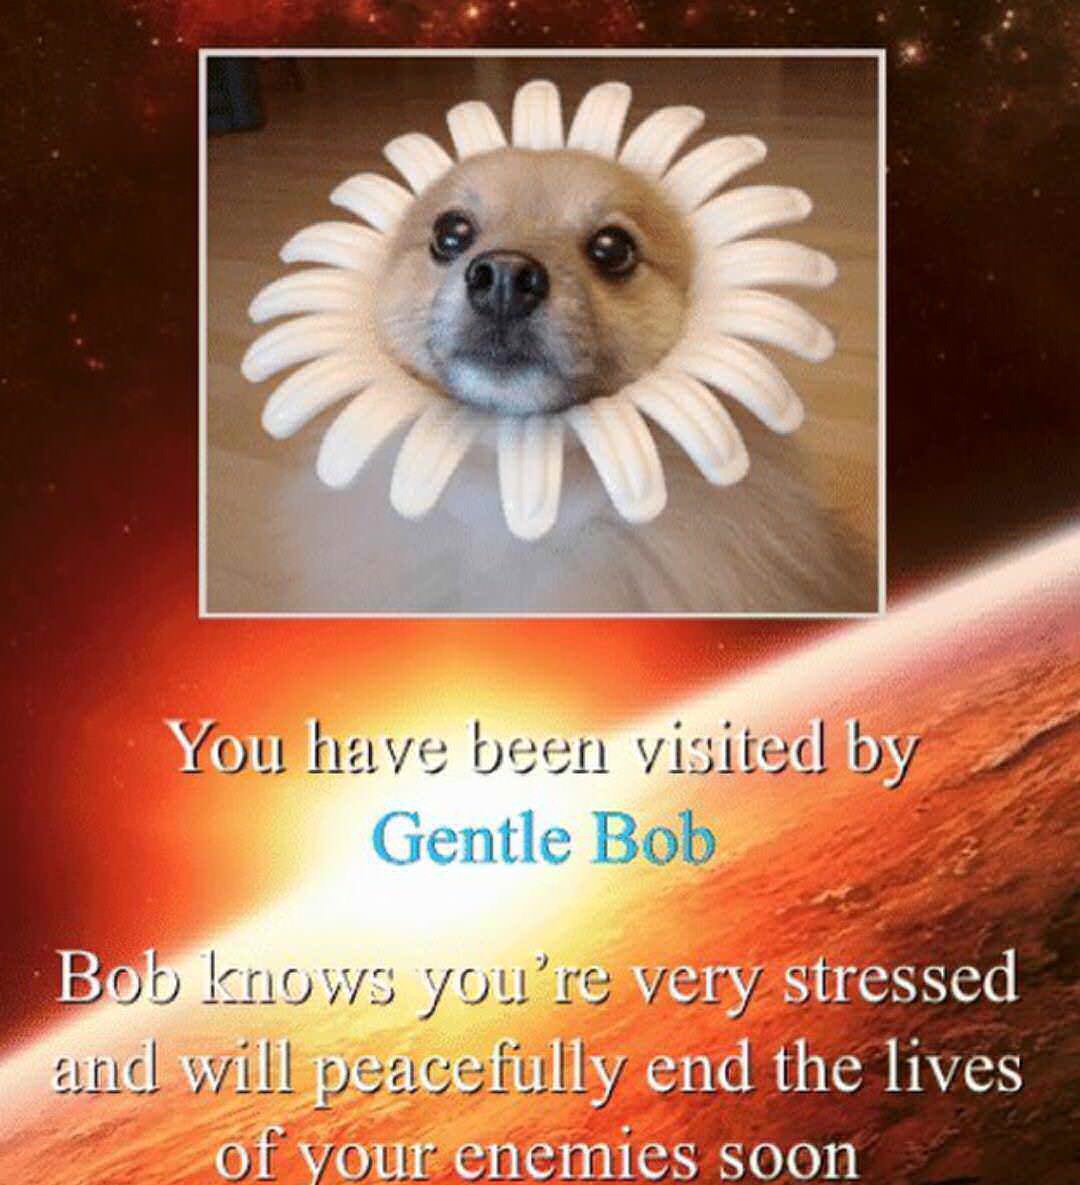 memes - gentle bob - You have been visited by Gentle Bob Bob knows you're very stressed and will peacefully end the lives of your enemies soon